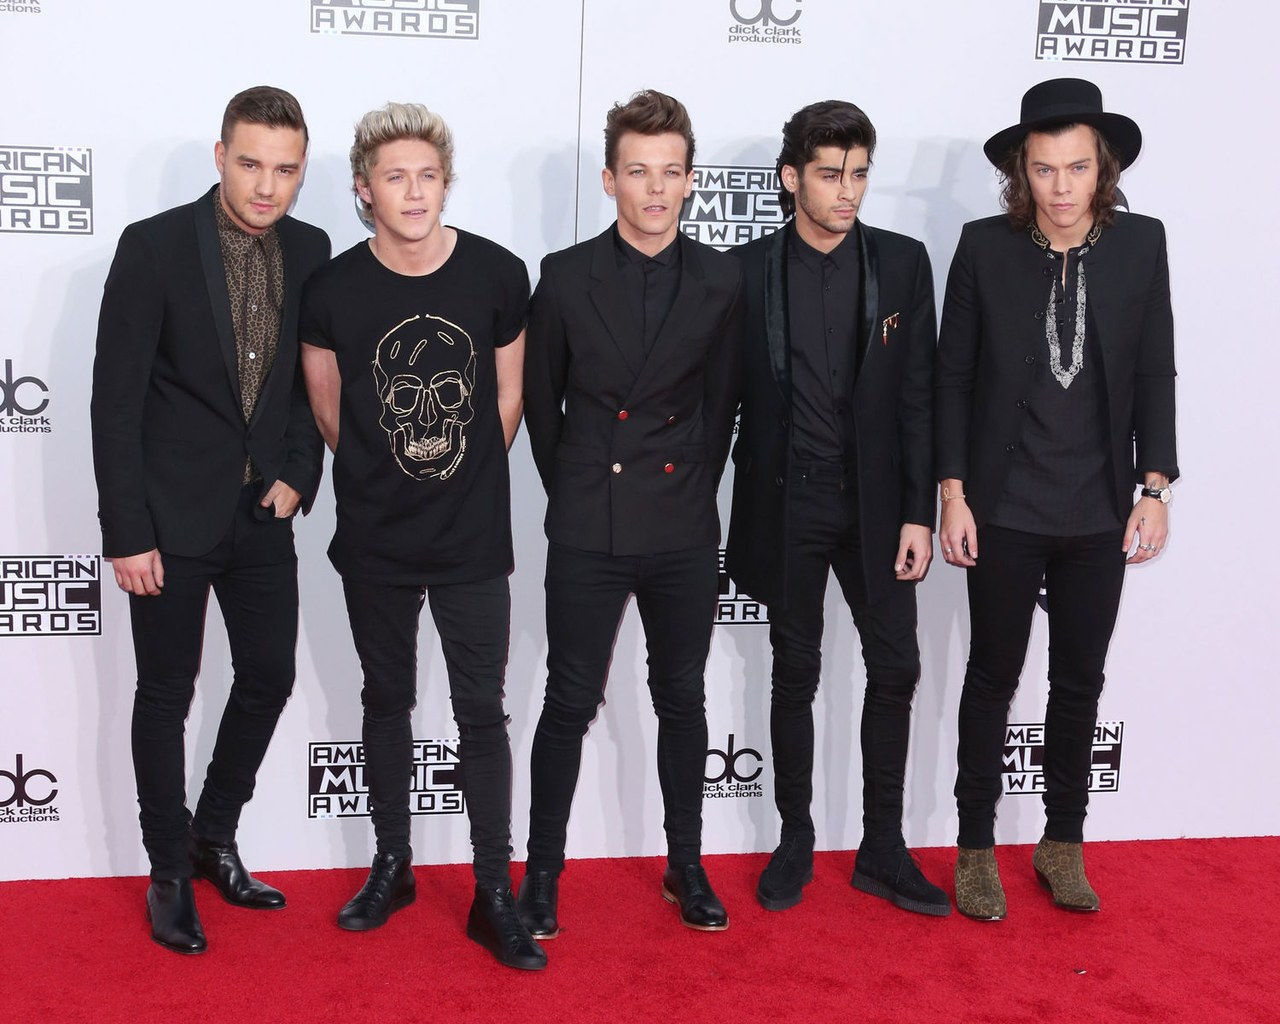 uno direction arriving red carpet american music awards 2014